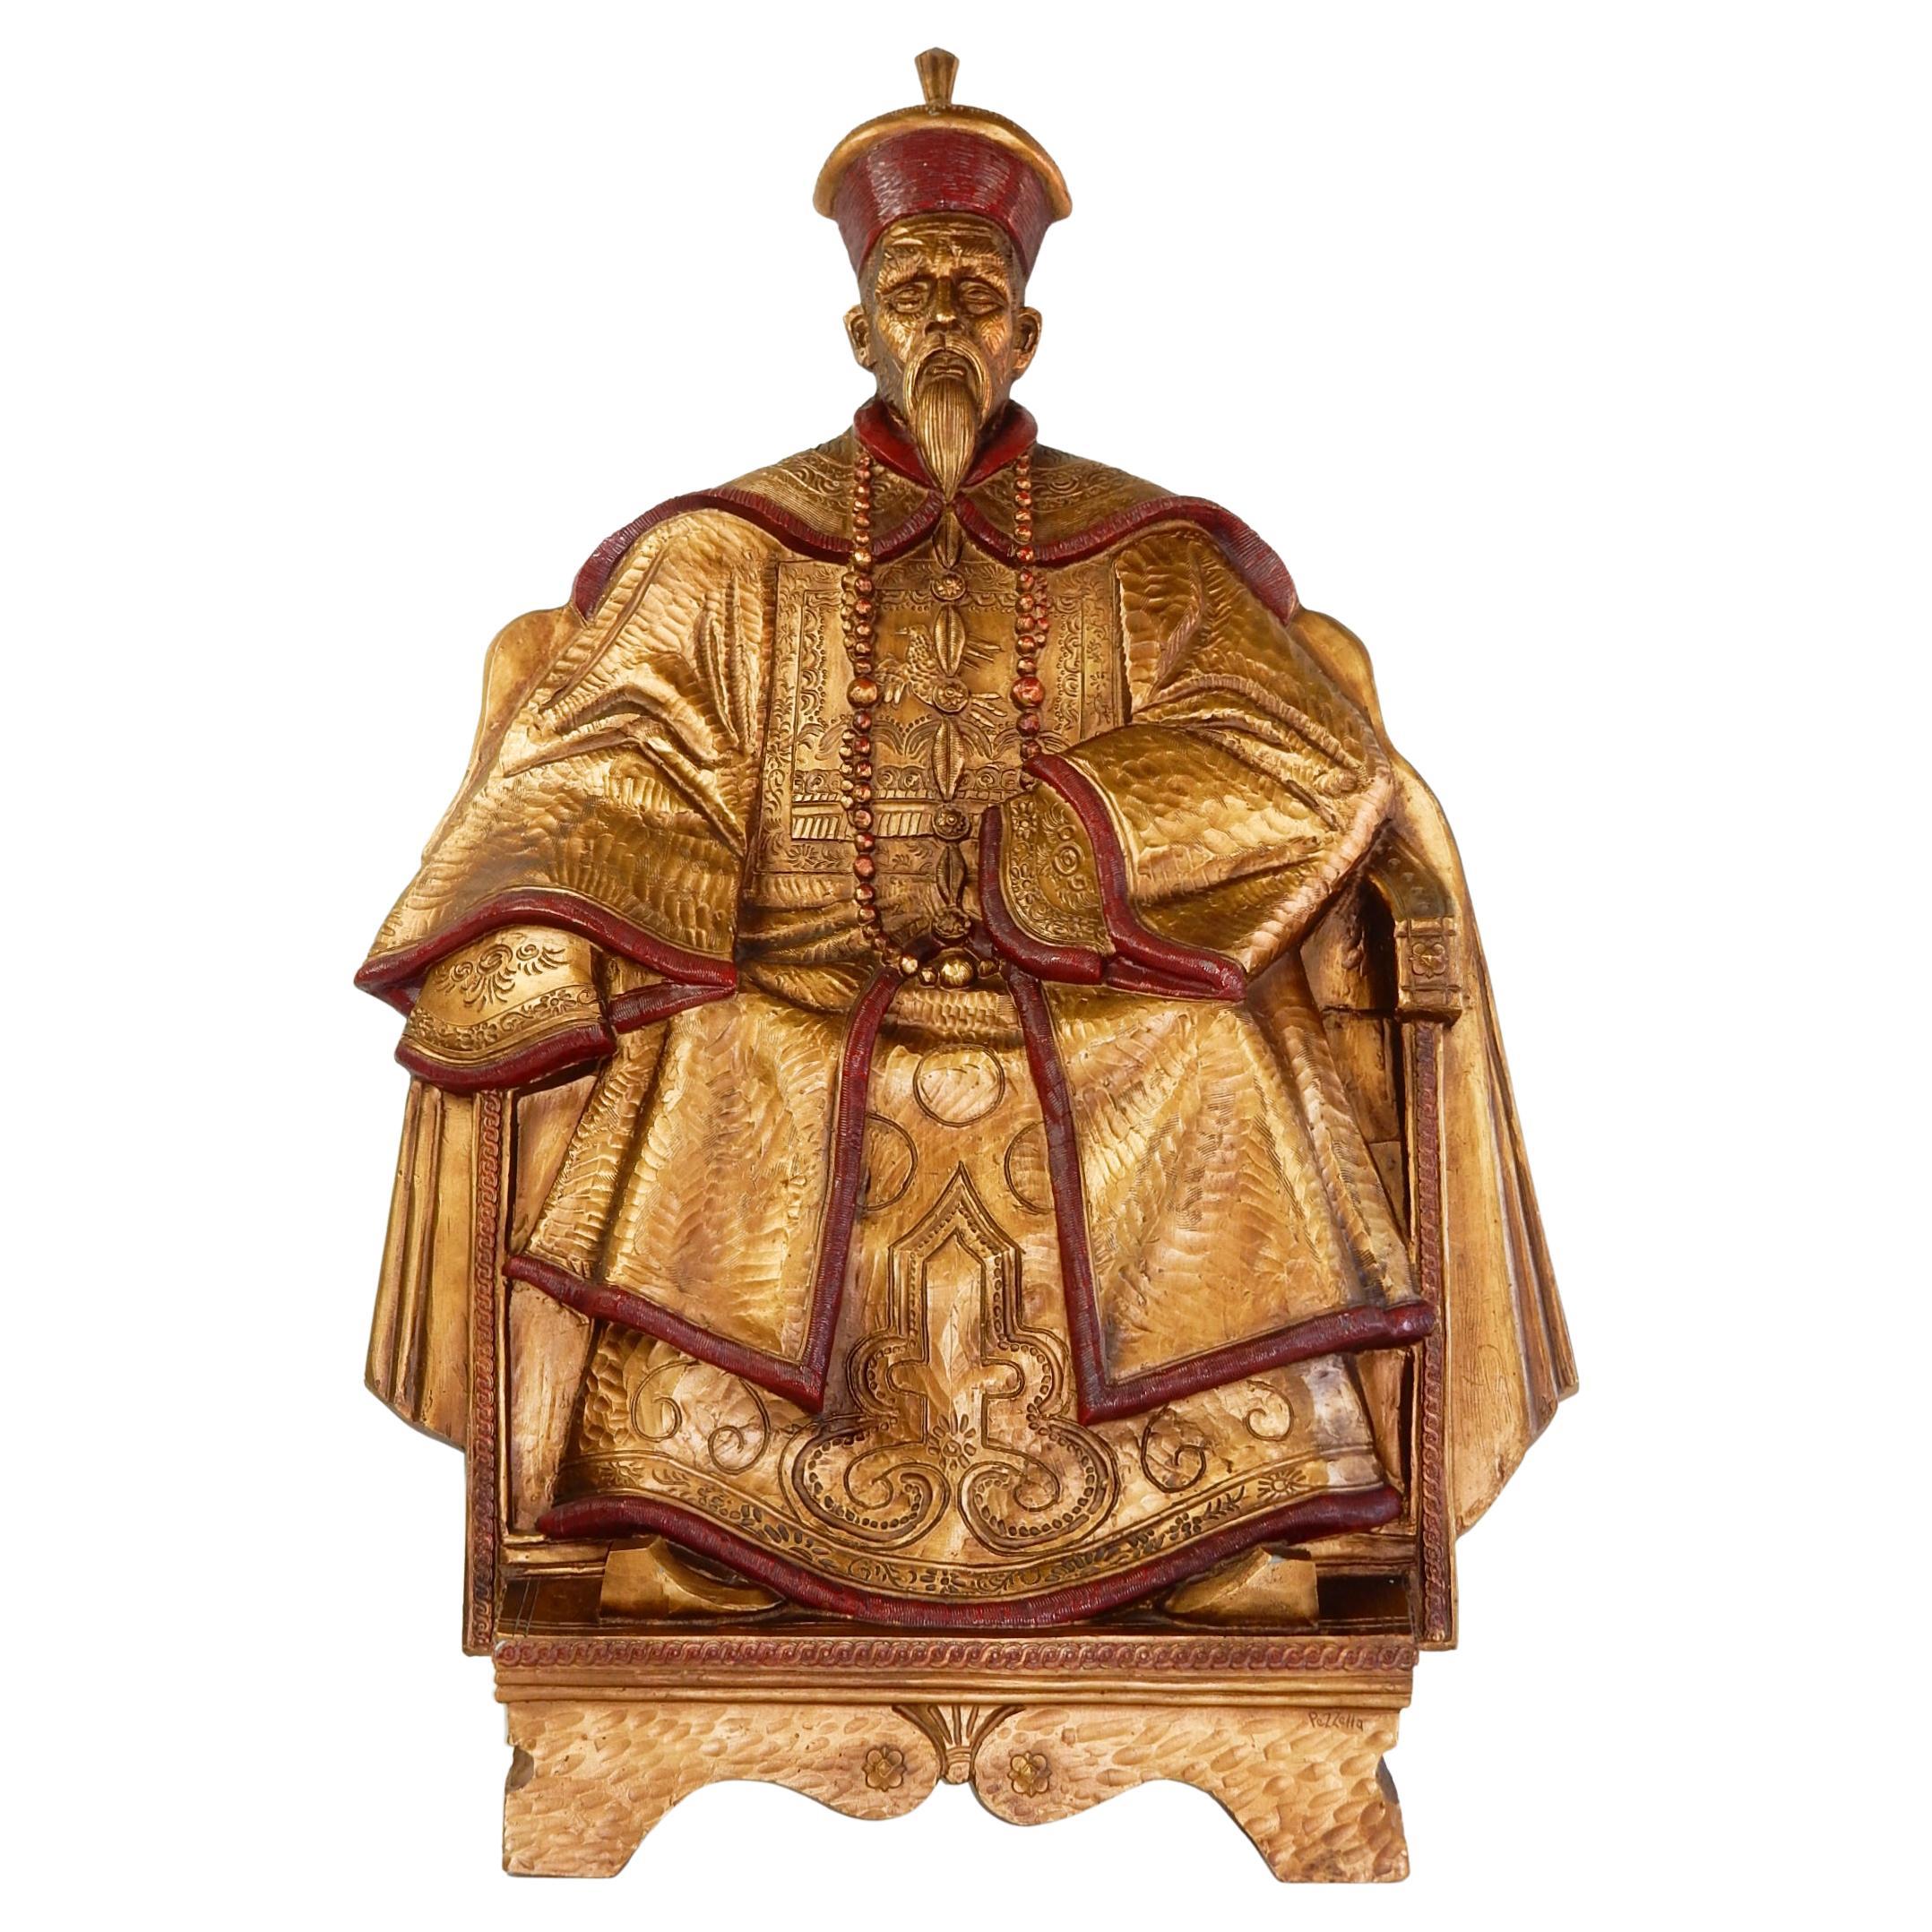 Chinese Emperor on Throne Wall Art Sculpture by Pezzella, 1960s